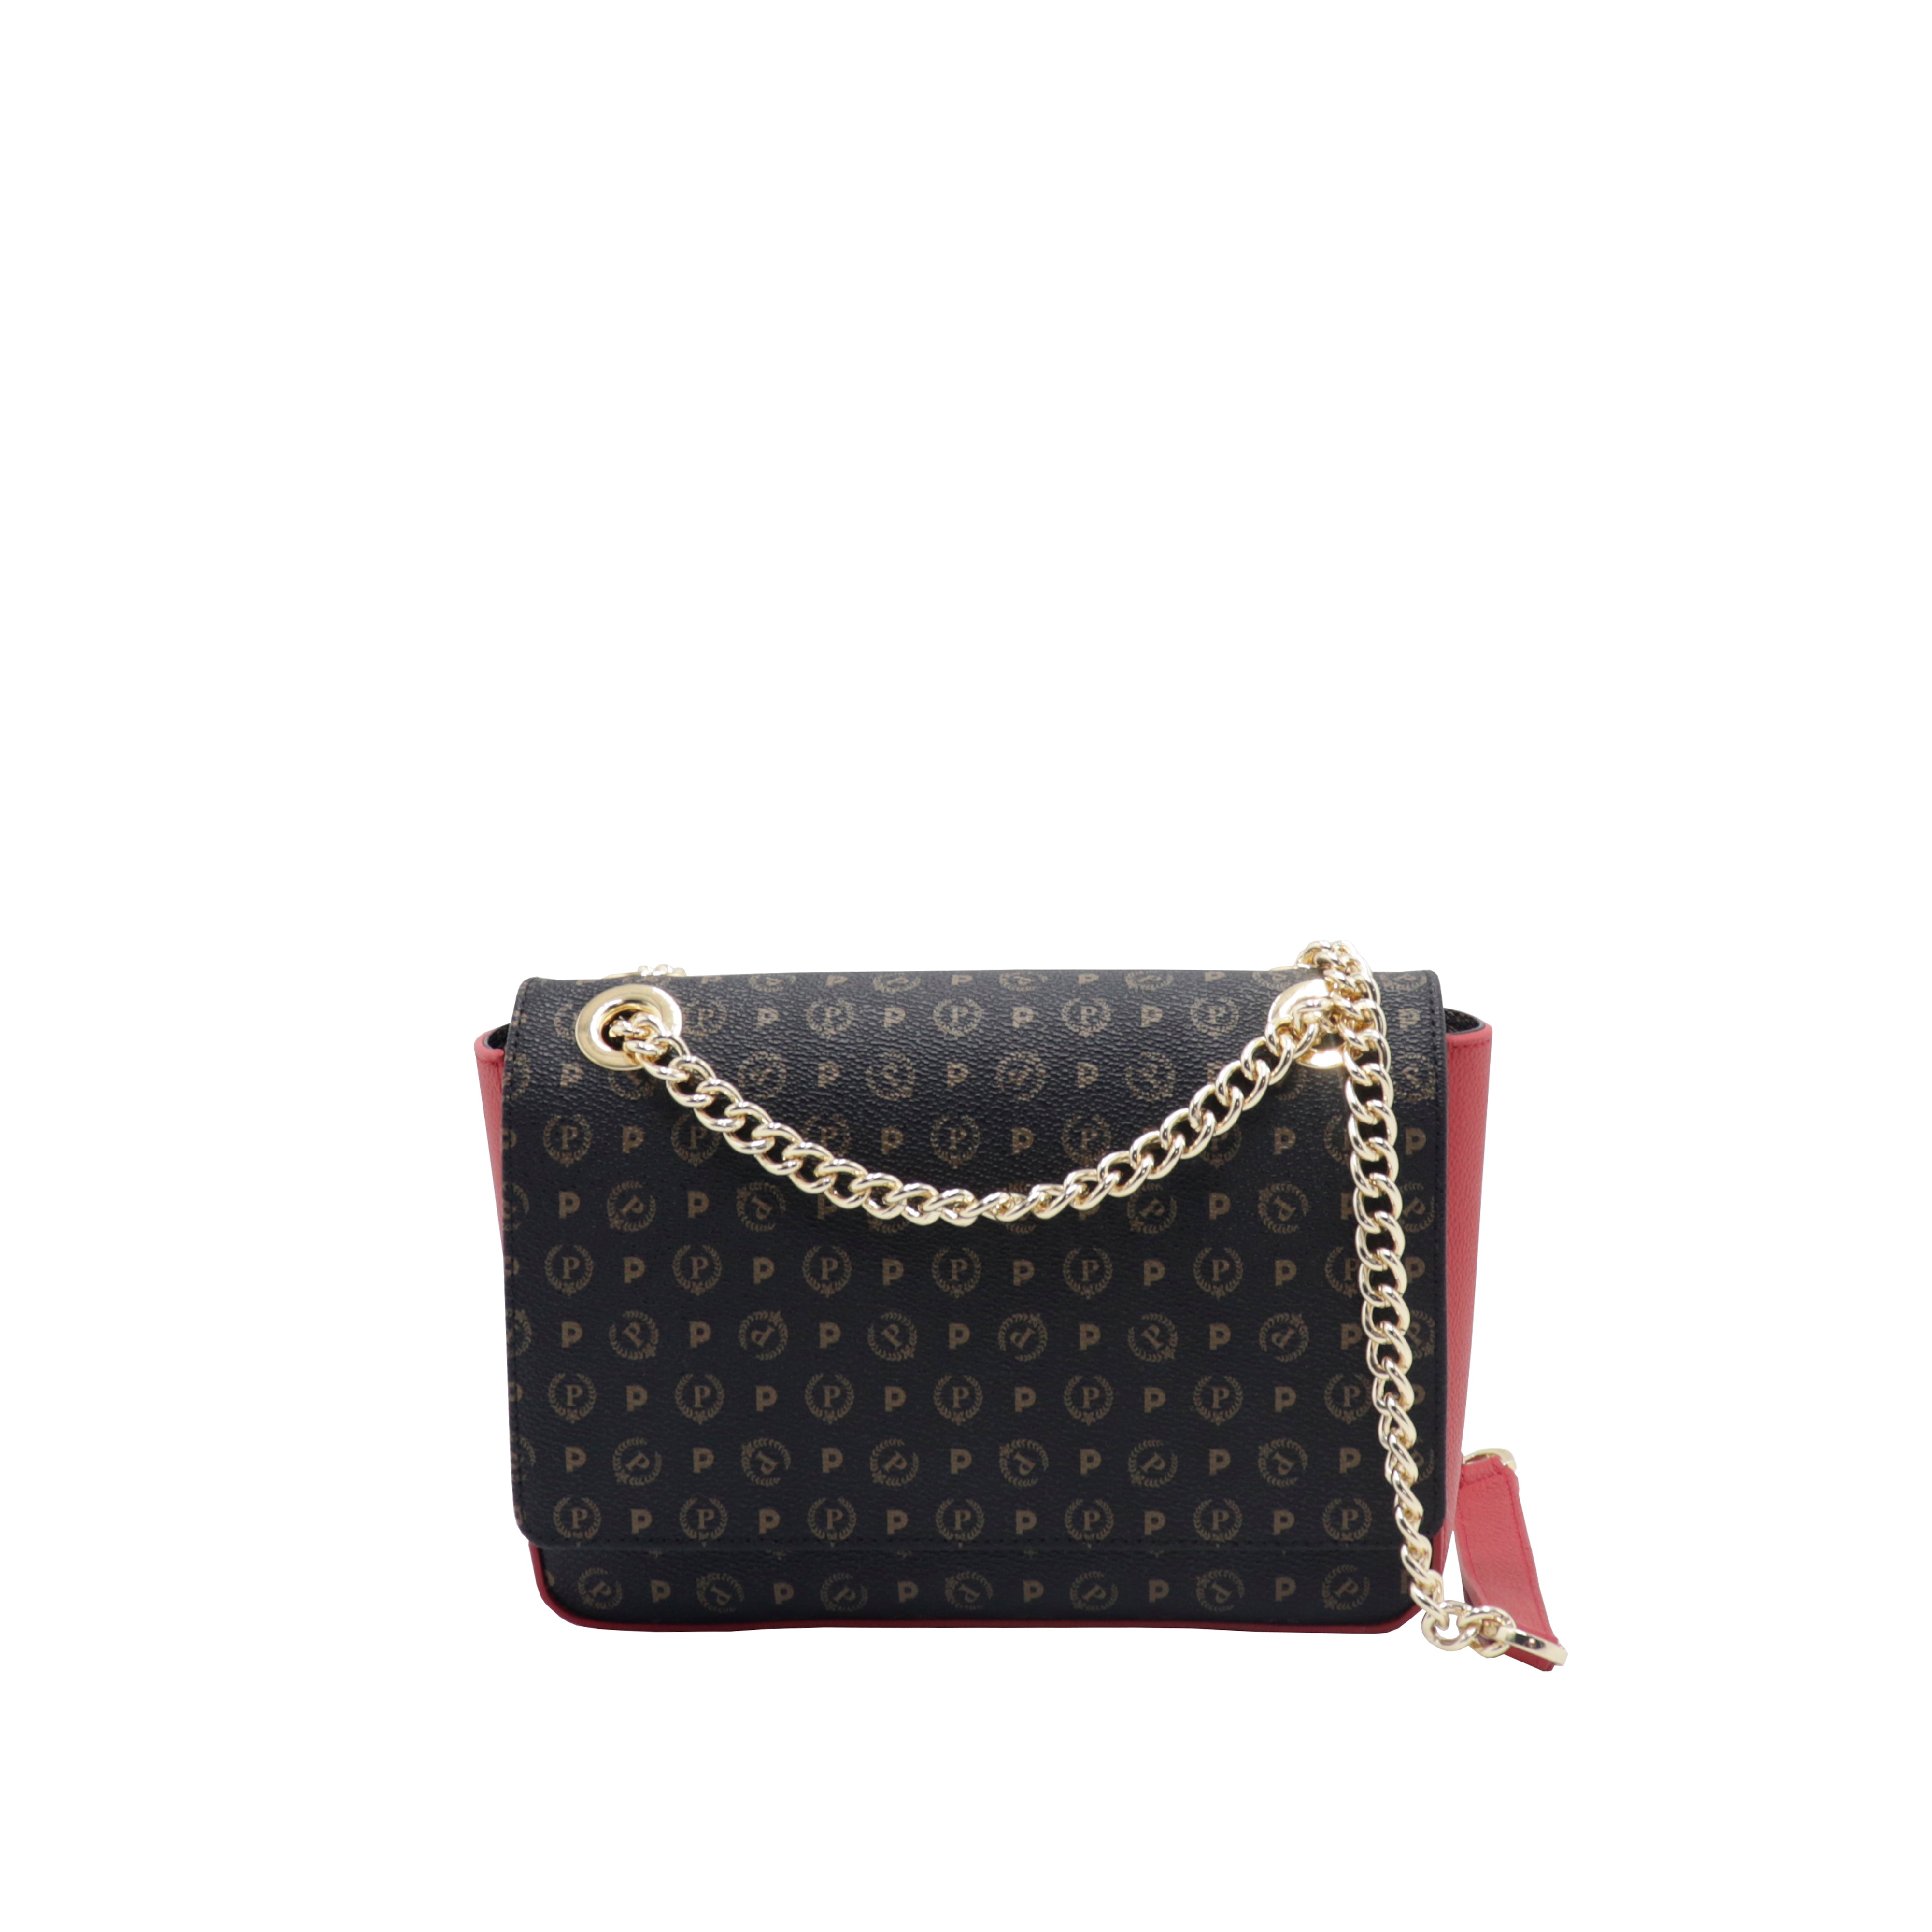 Pollini Heritage Bag Black and Lacquer